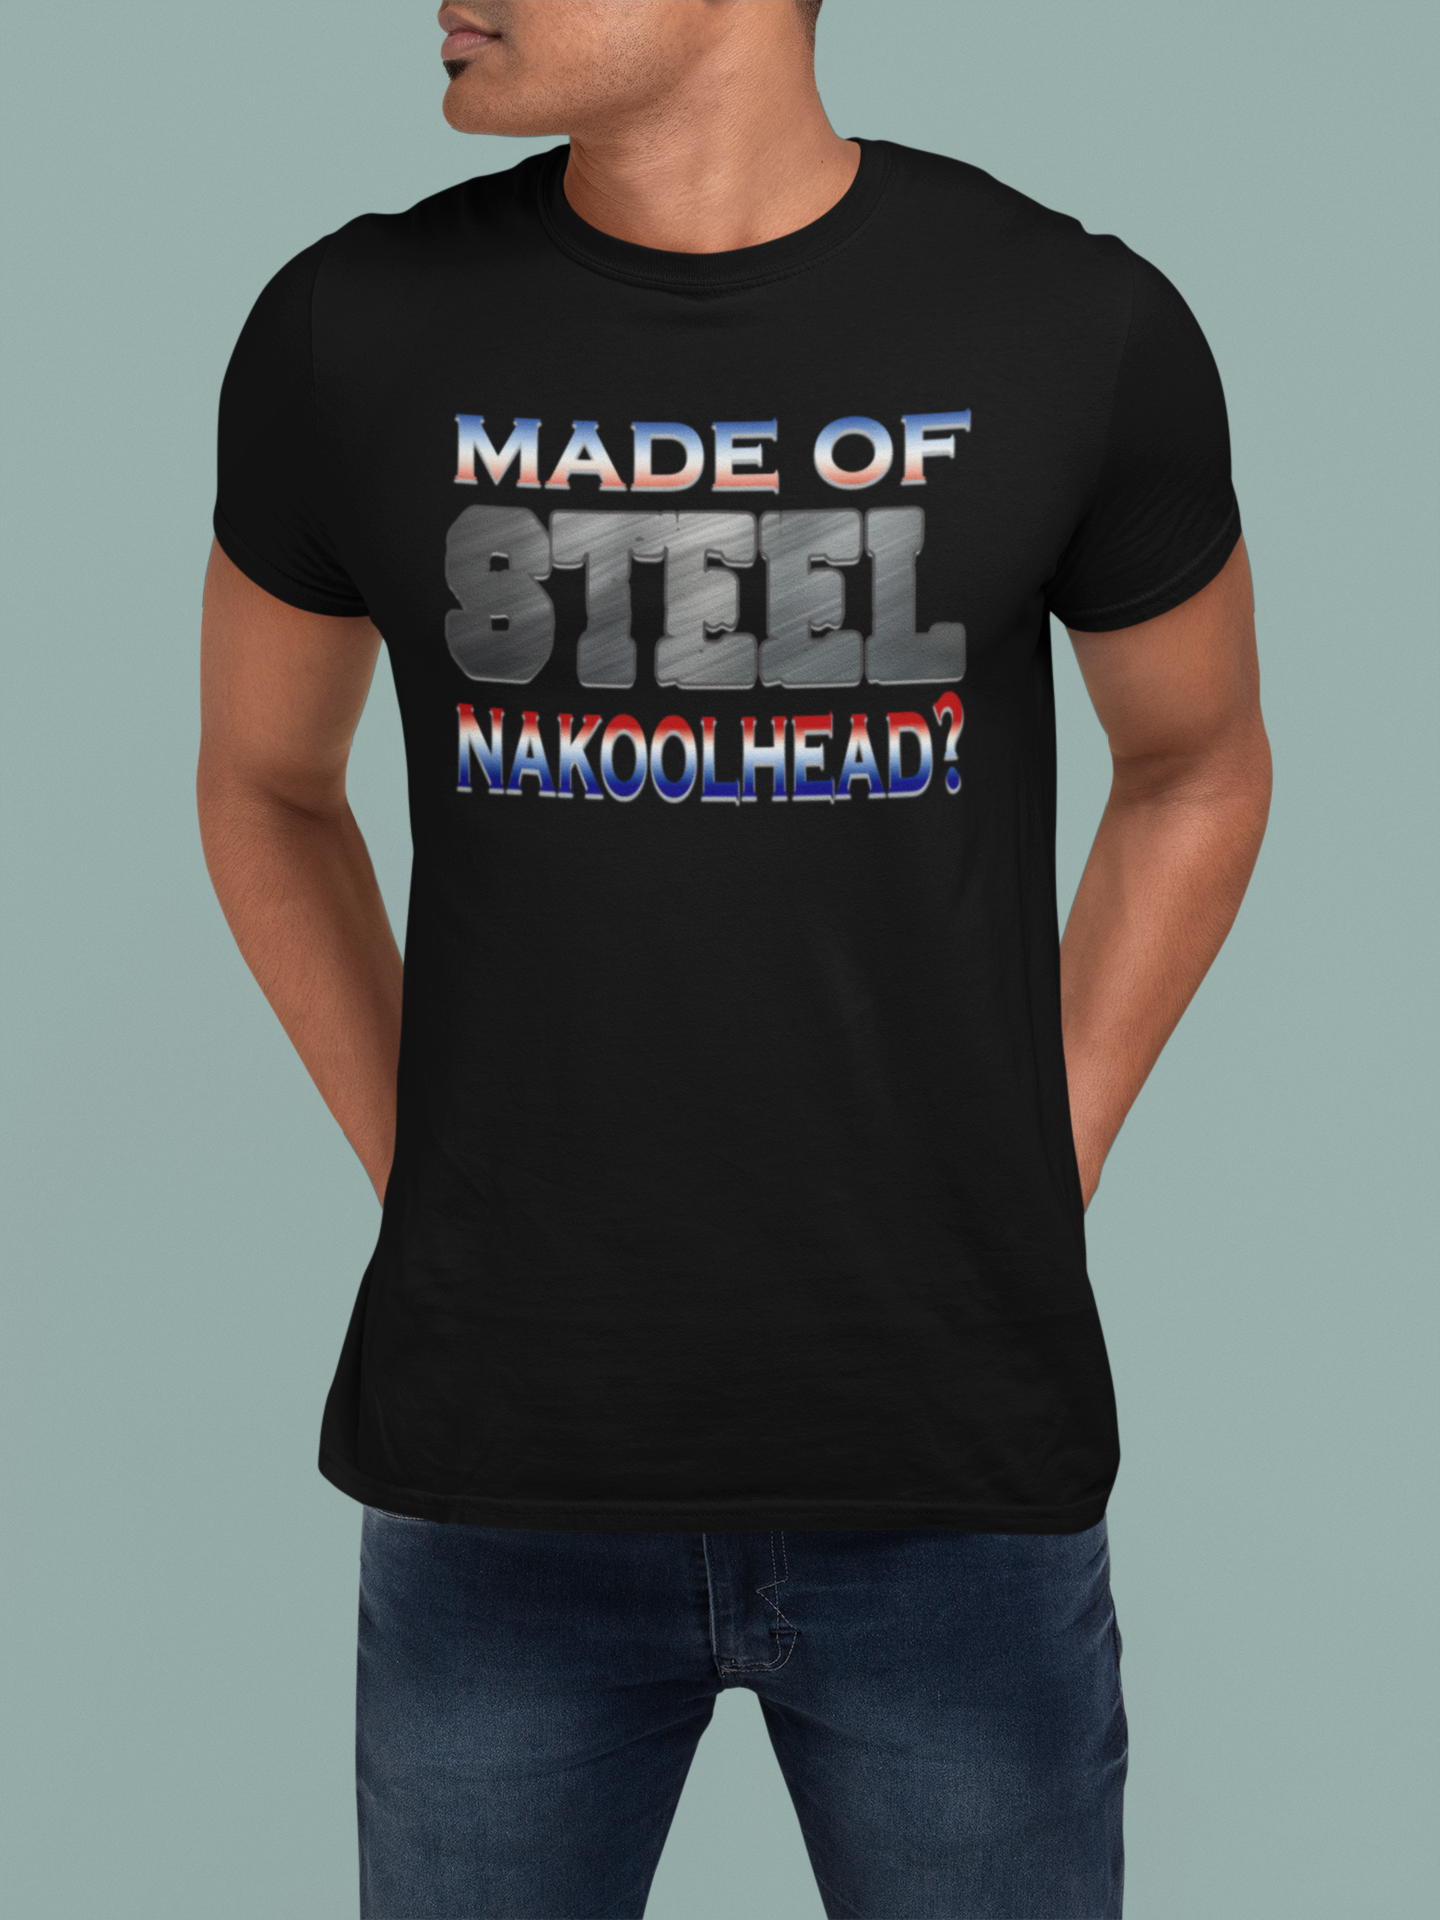 MADE OF STEEL